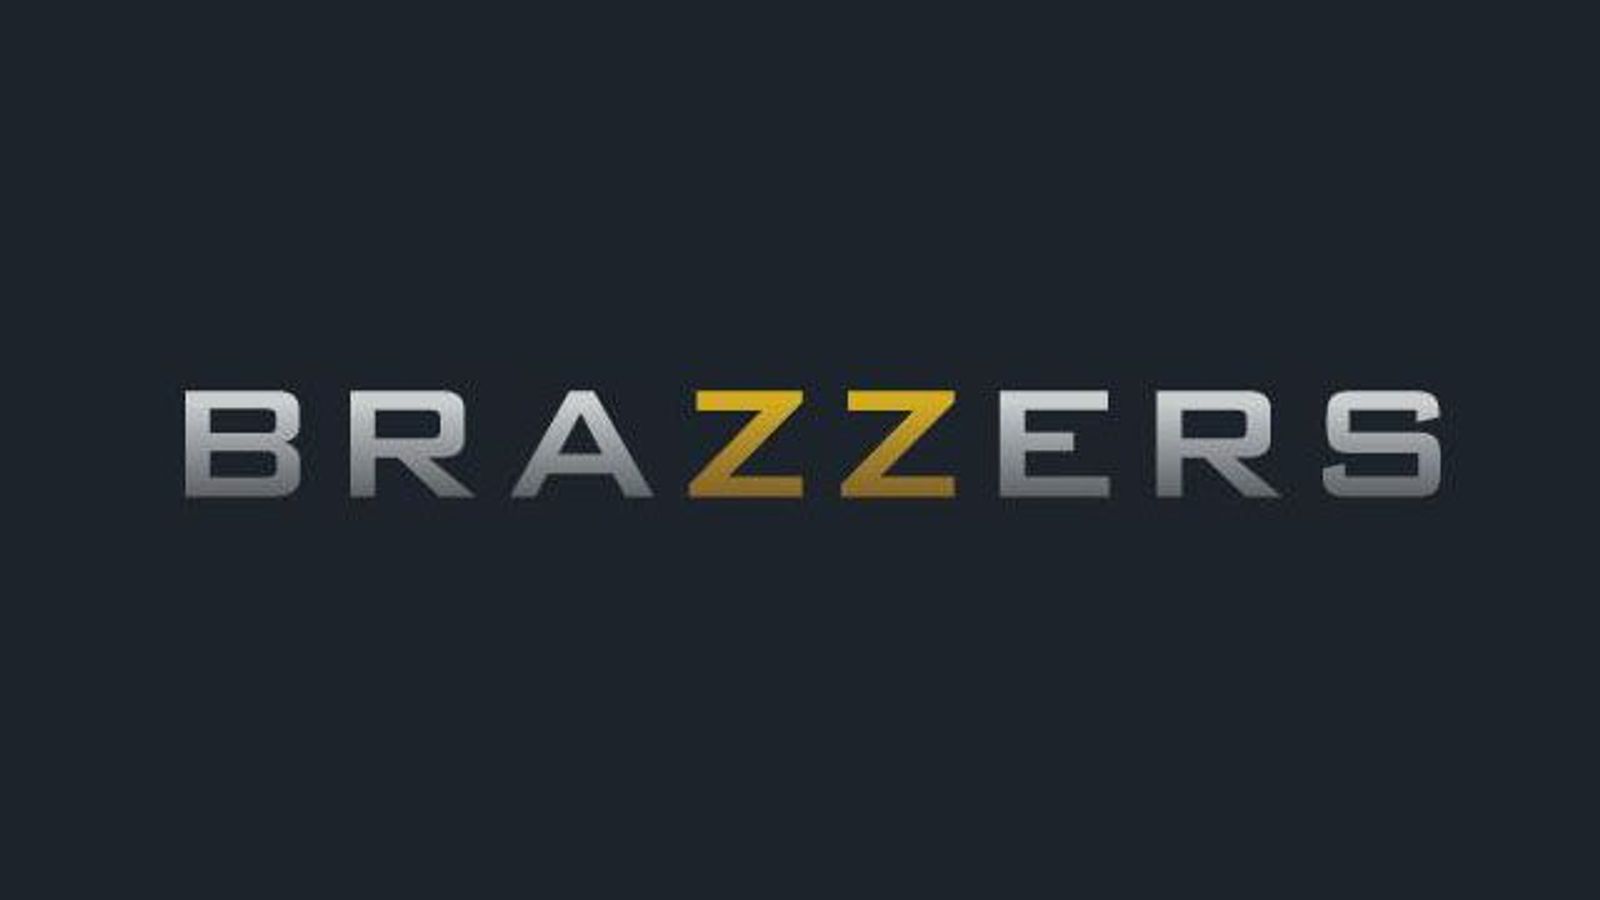 Brazzers.com Producers’ Audition Contest Ends; Scene Online